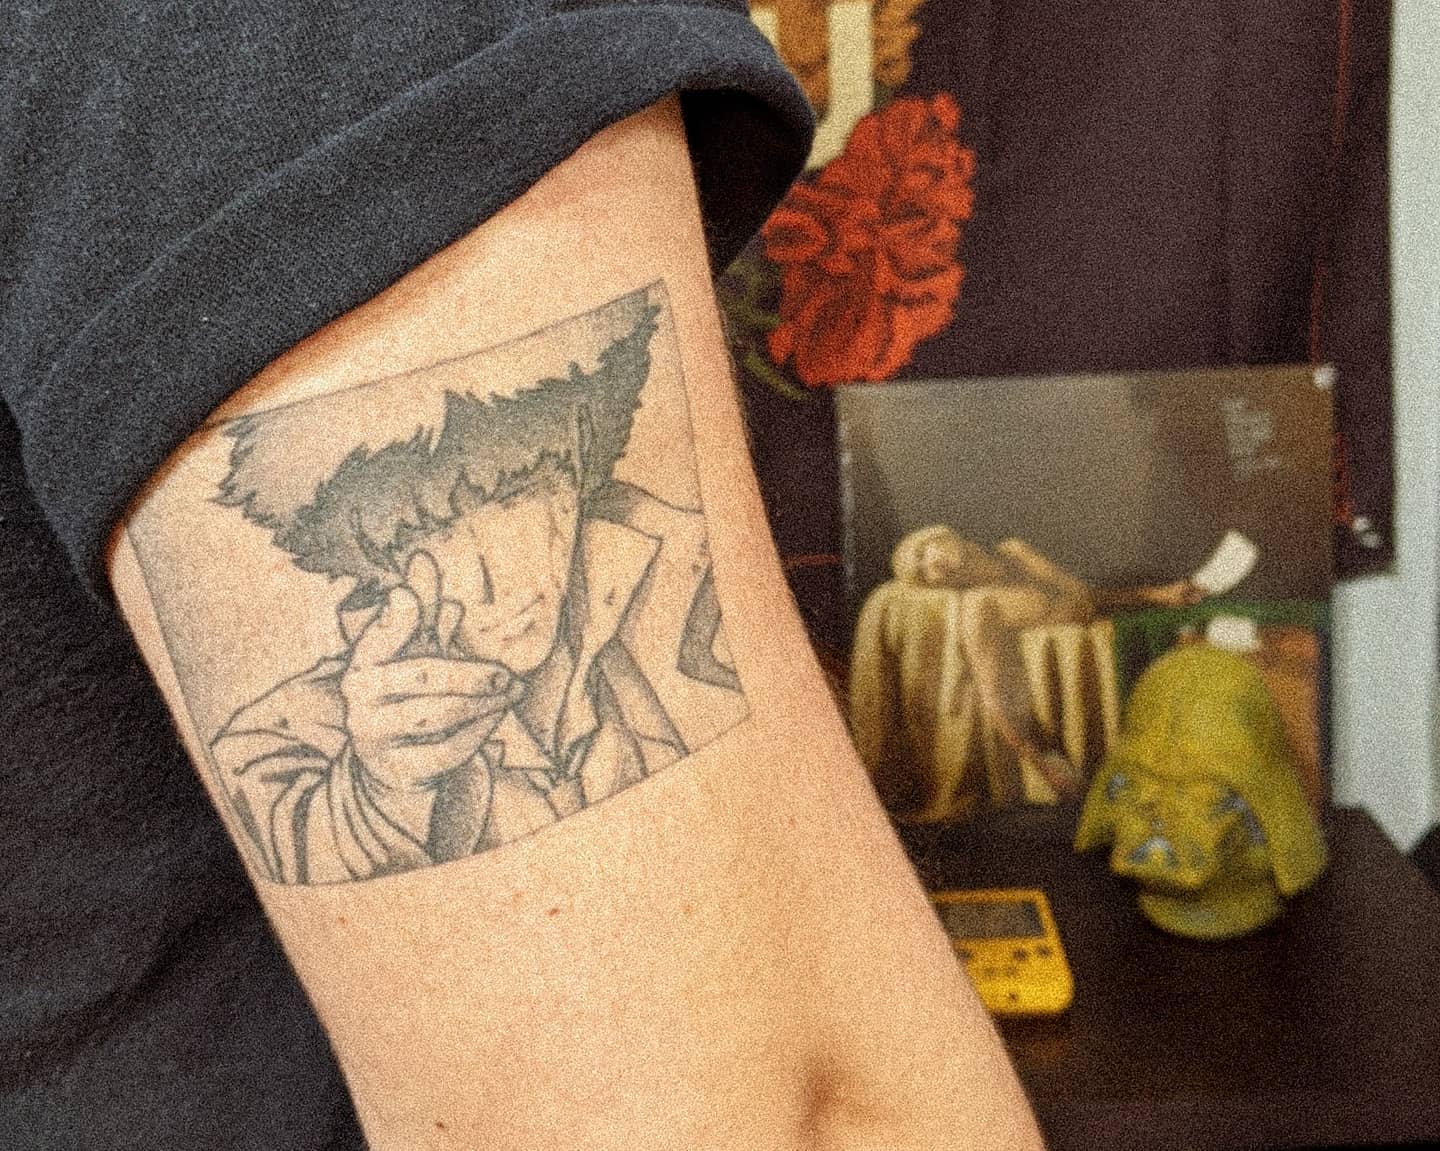 Errance  Next day pics of this CowboyBebop piece  Spikes Swordfish  ii ship  This was so fun Id love to do more mangaanime tattoos this year  please  Facebook